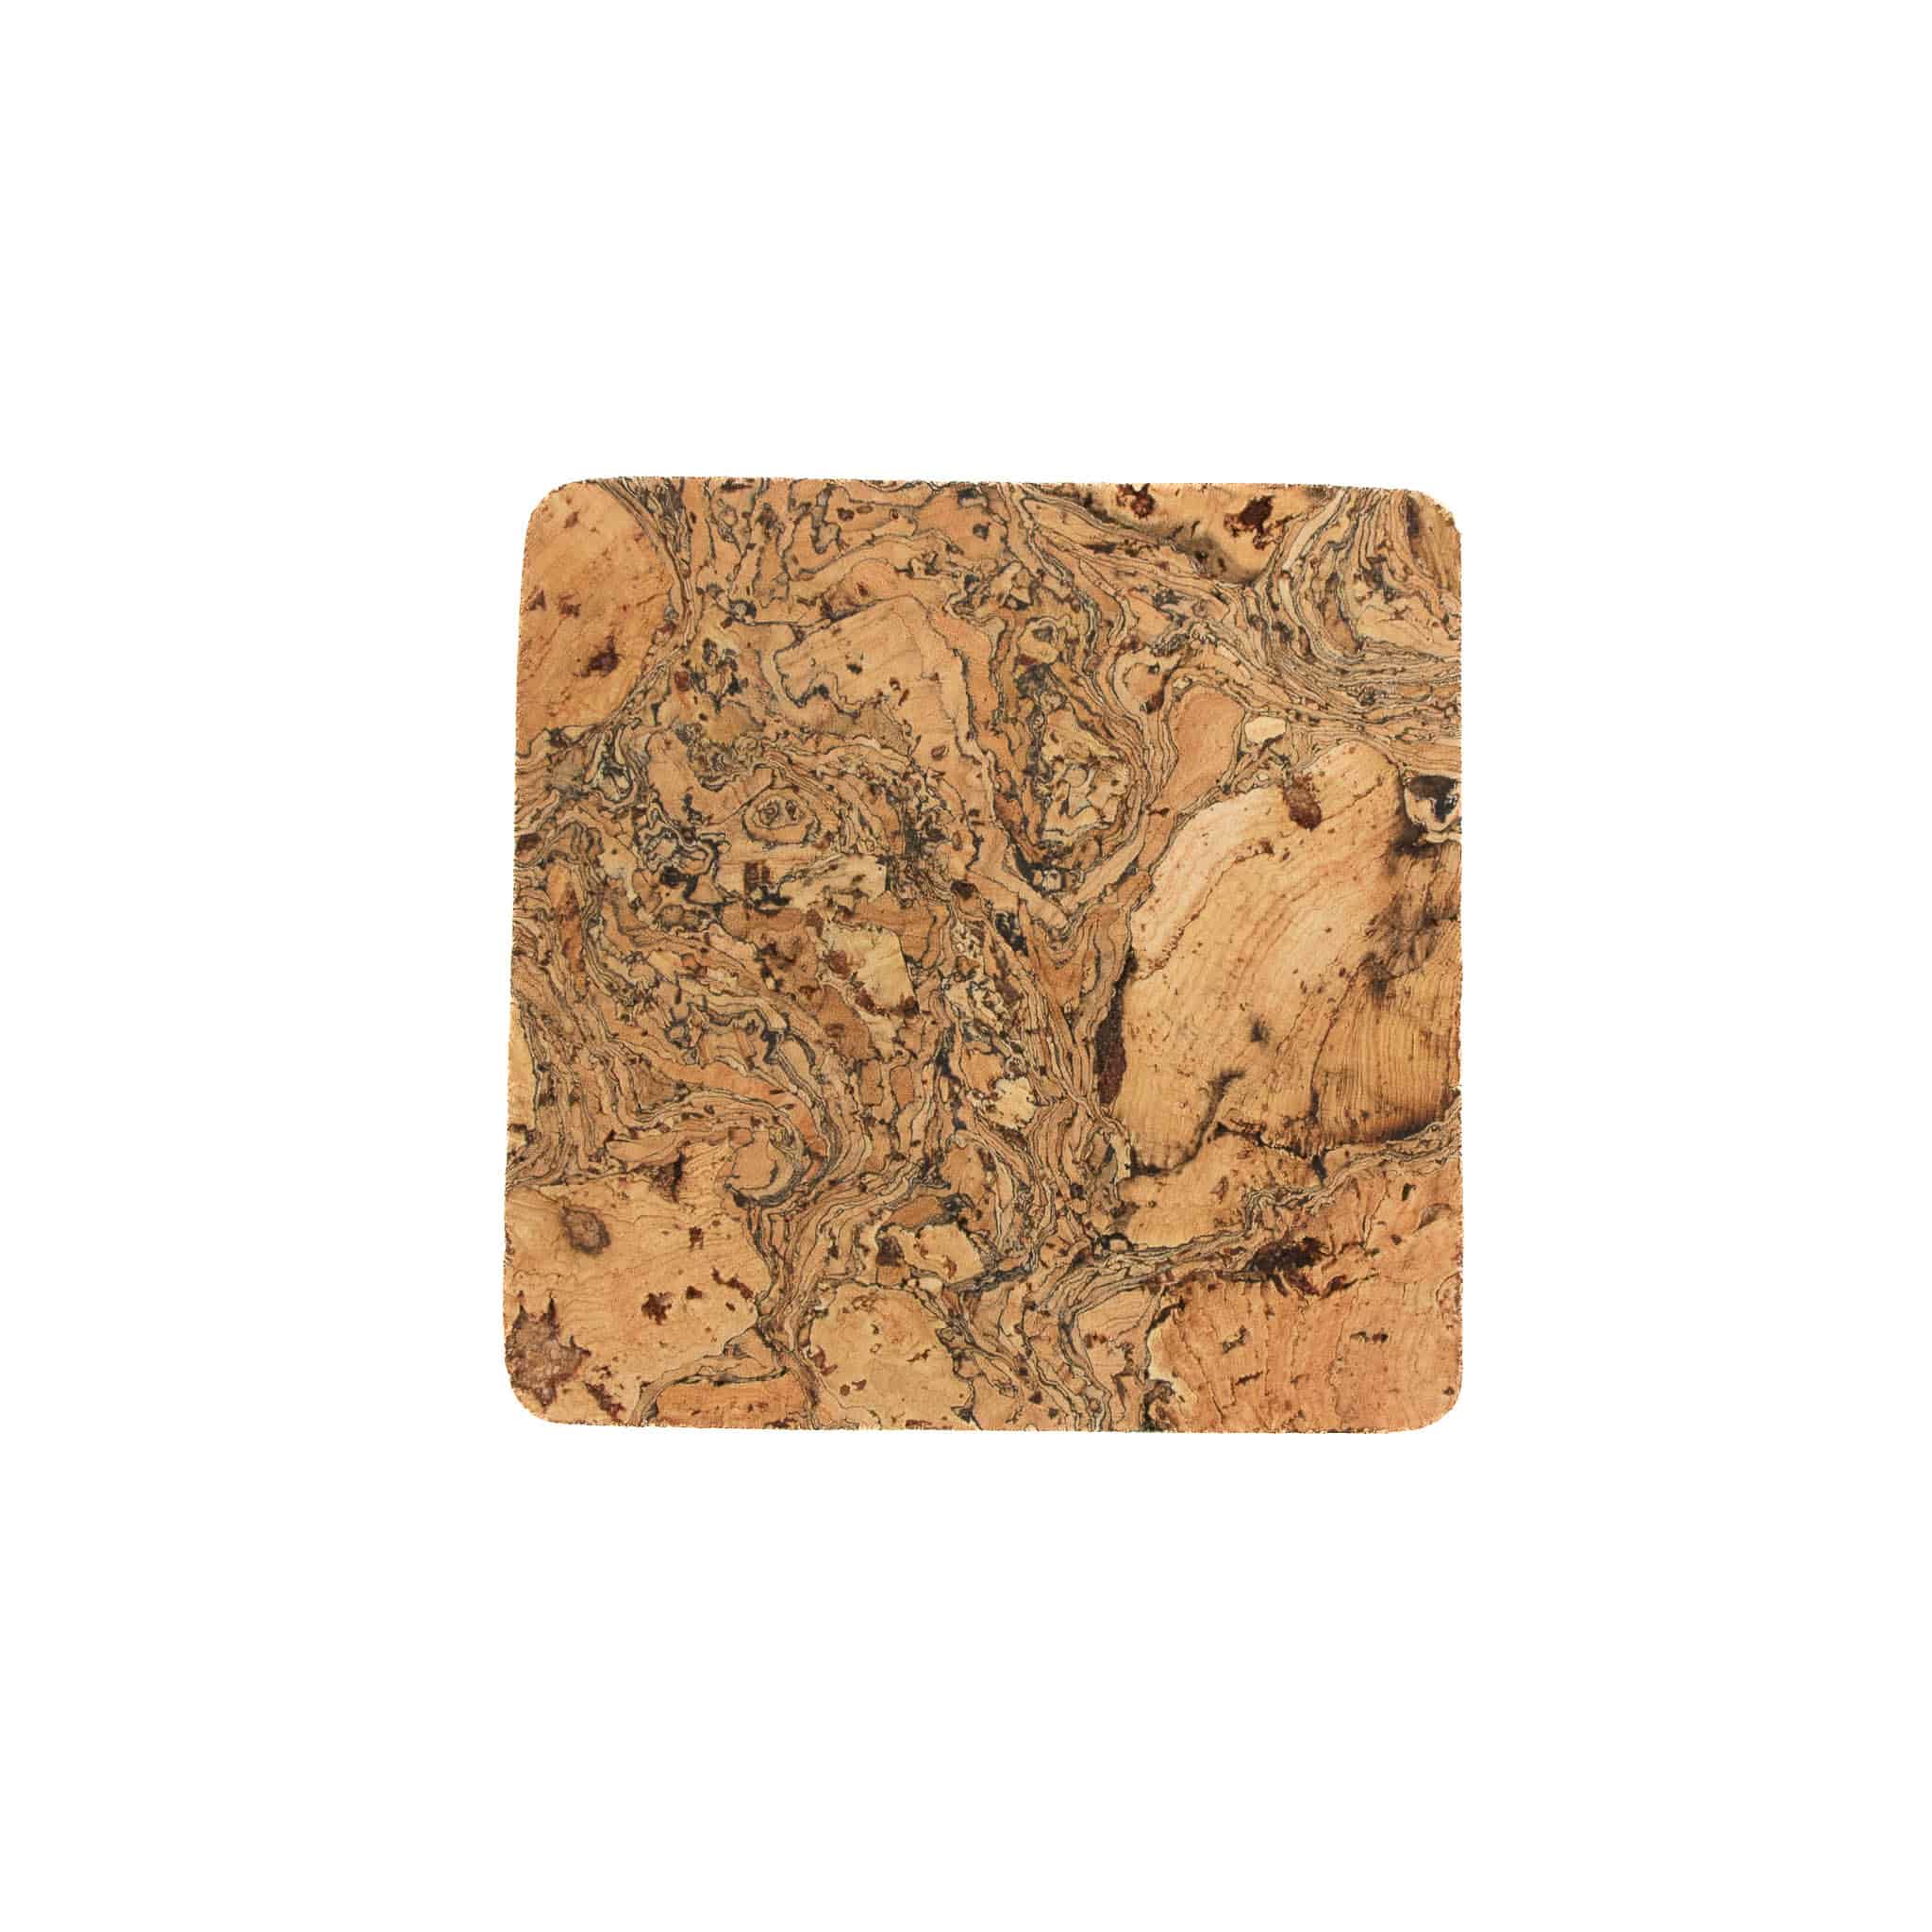 Set of 4 Marbled Cork Square Coasters, 9cm